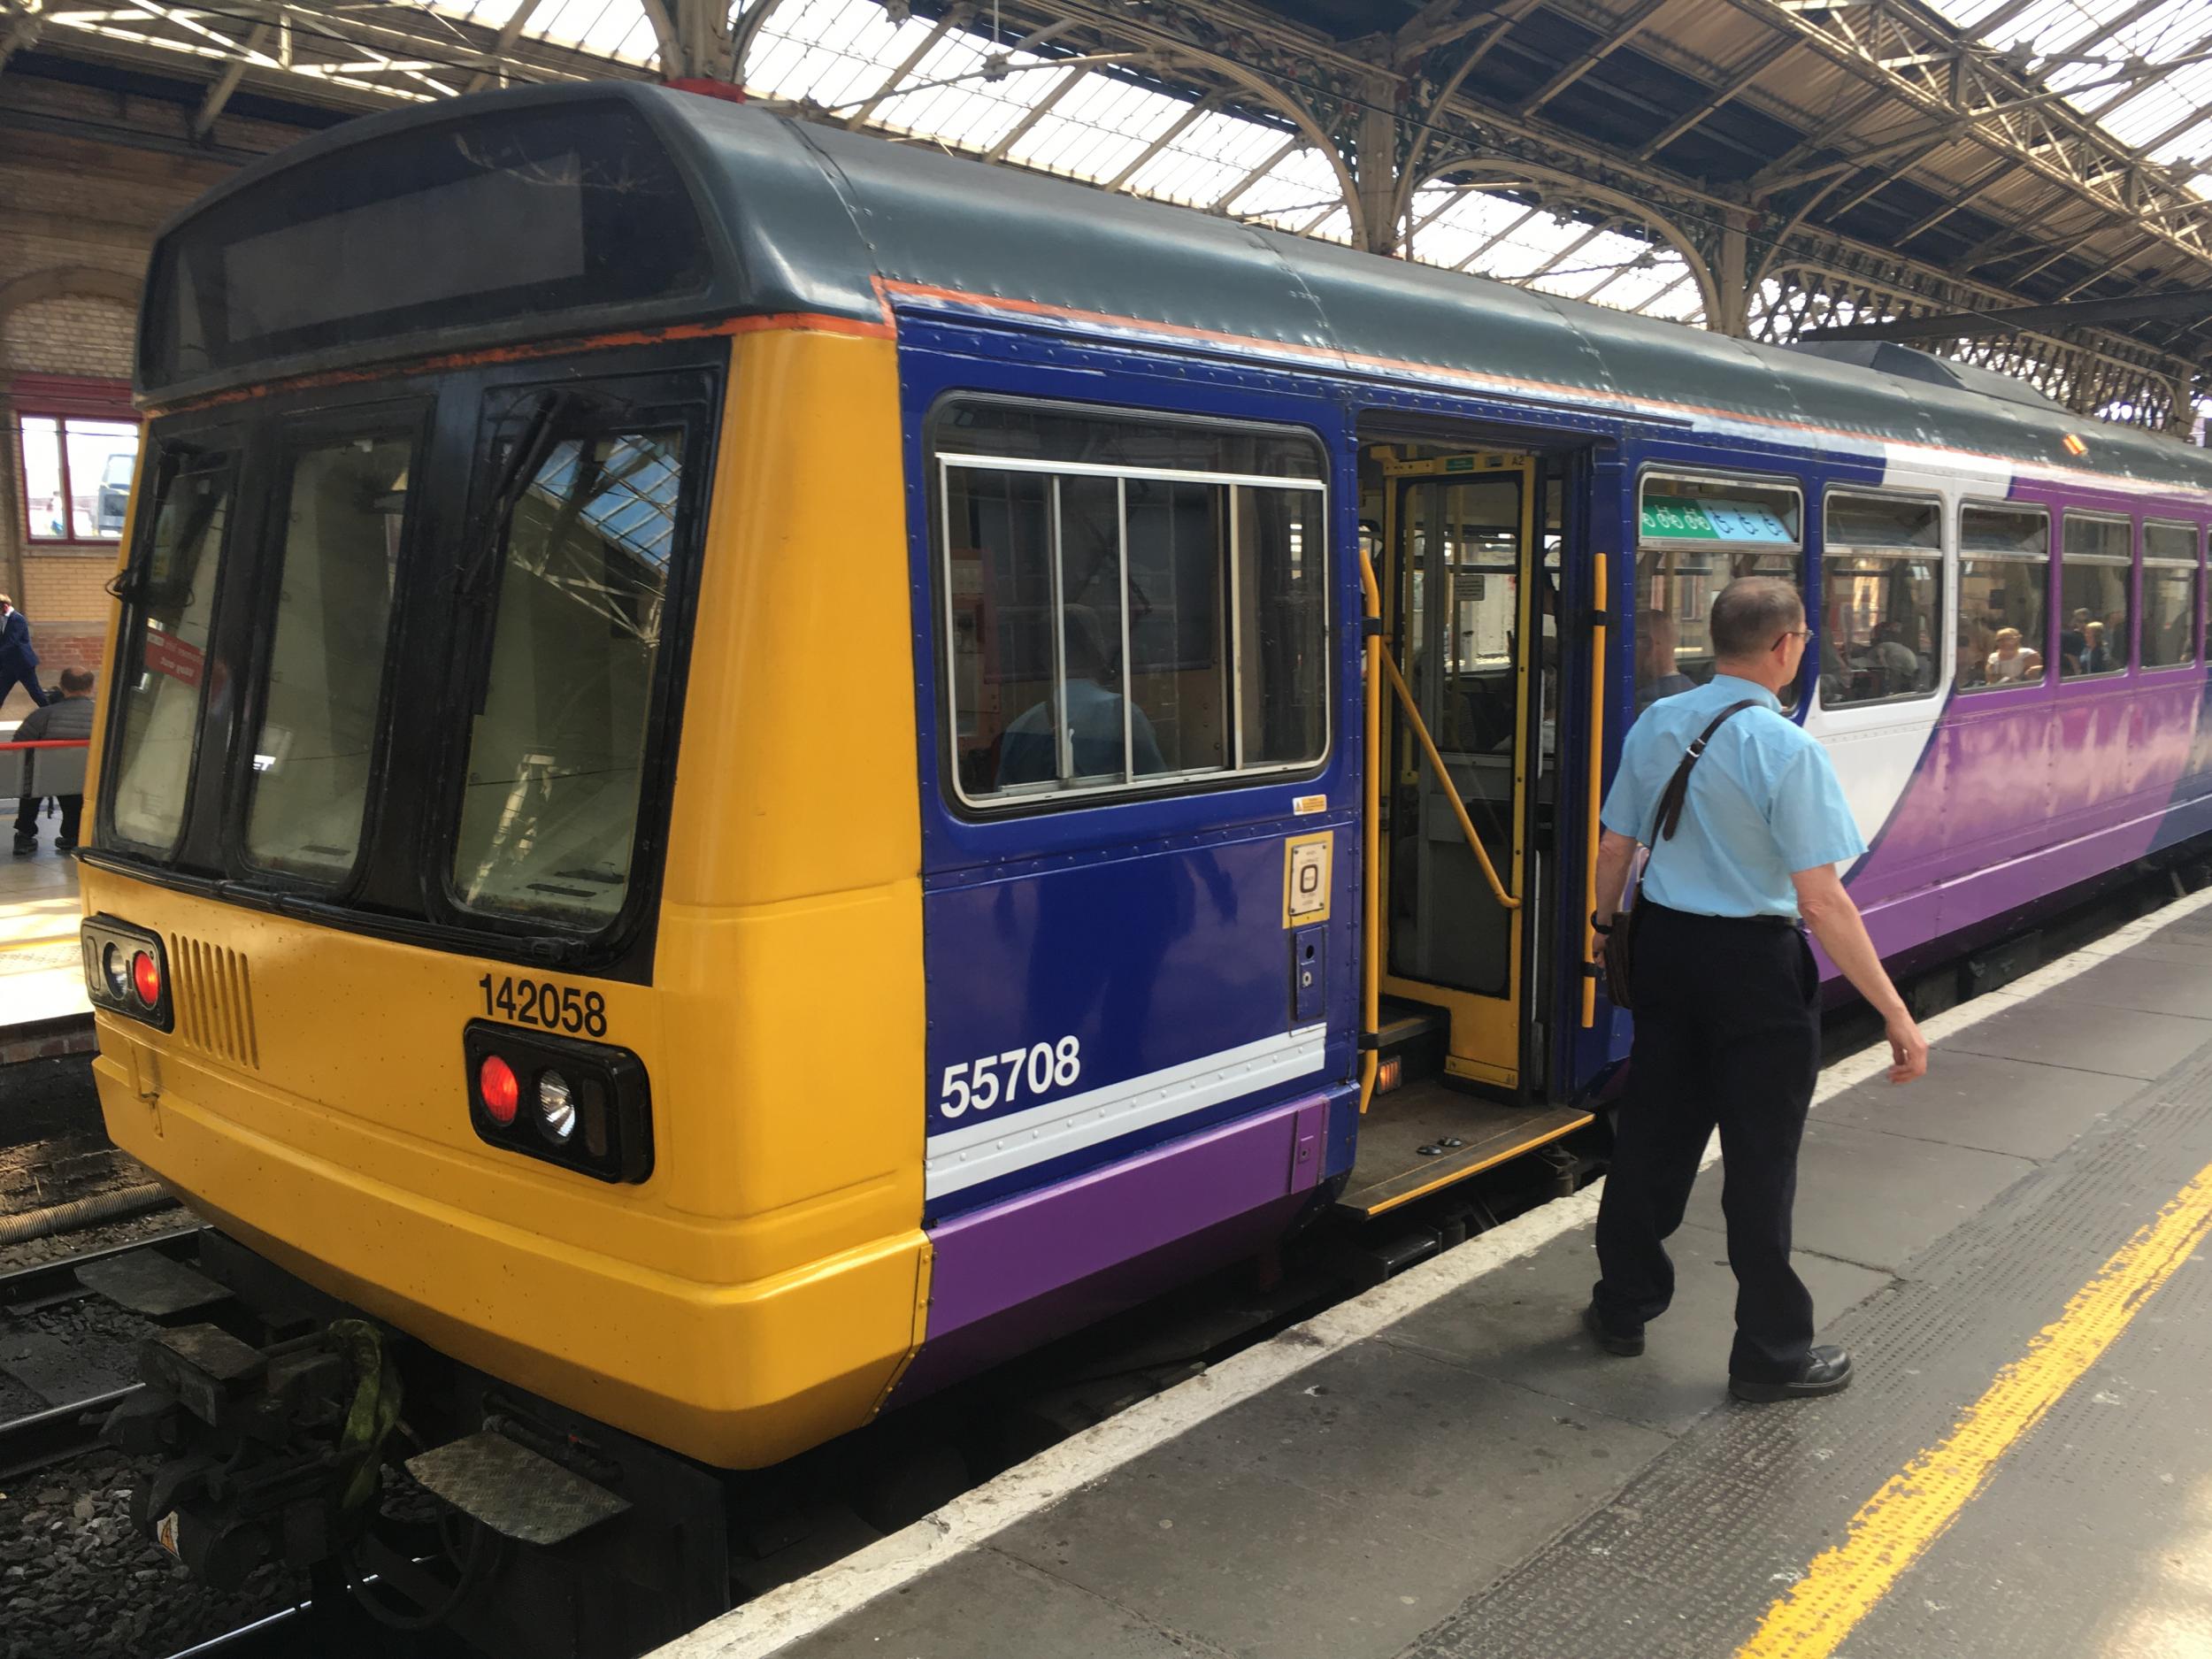 Time machine: Pacer train operated by Northern at Preston station in Lancashire